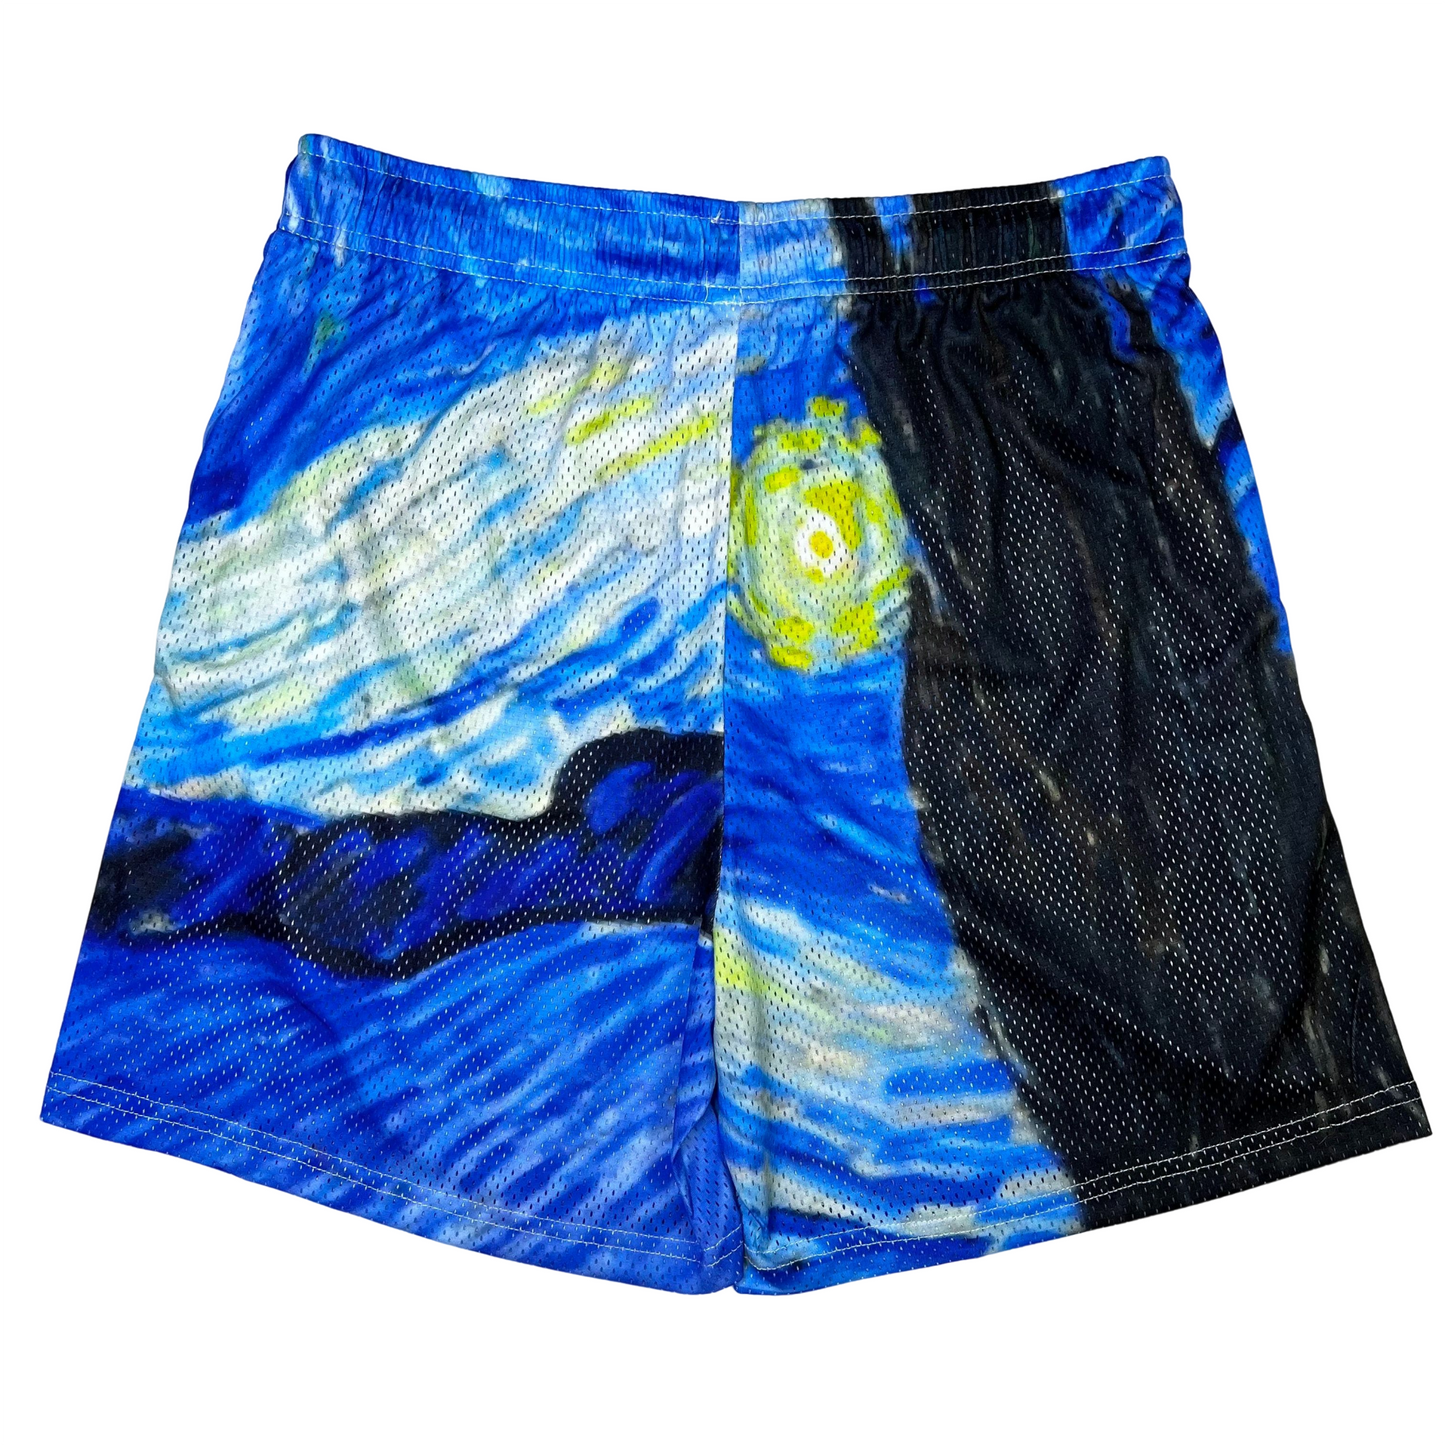 GZ Miami South Shore✥𝔾𝕣𝕠𝕦𝕟𝕕ℤ𝕖𝕣𝕠®✥2023 Southern suit big guy/GZ American casual neutral sports outdoor Longhe starry night quarter shorts and ball pants 